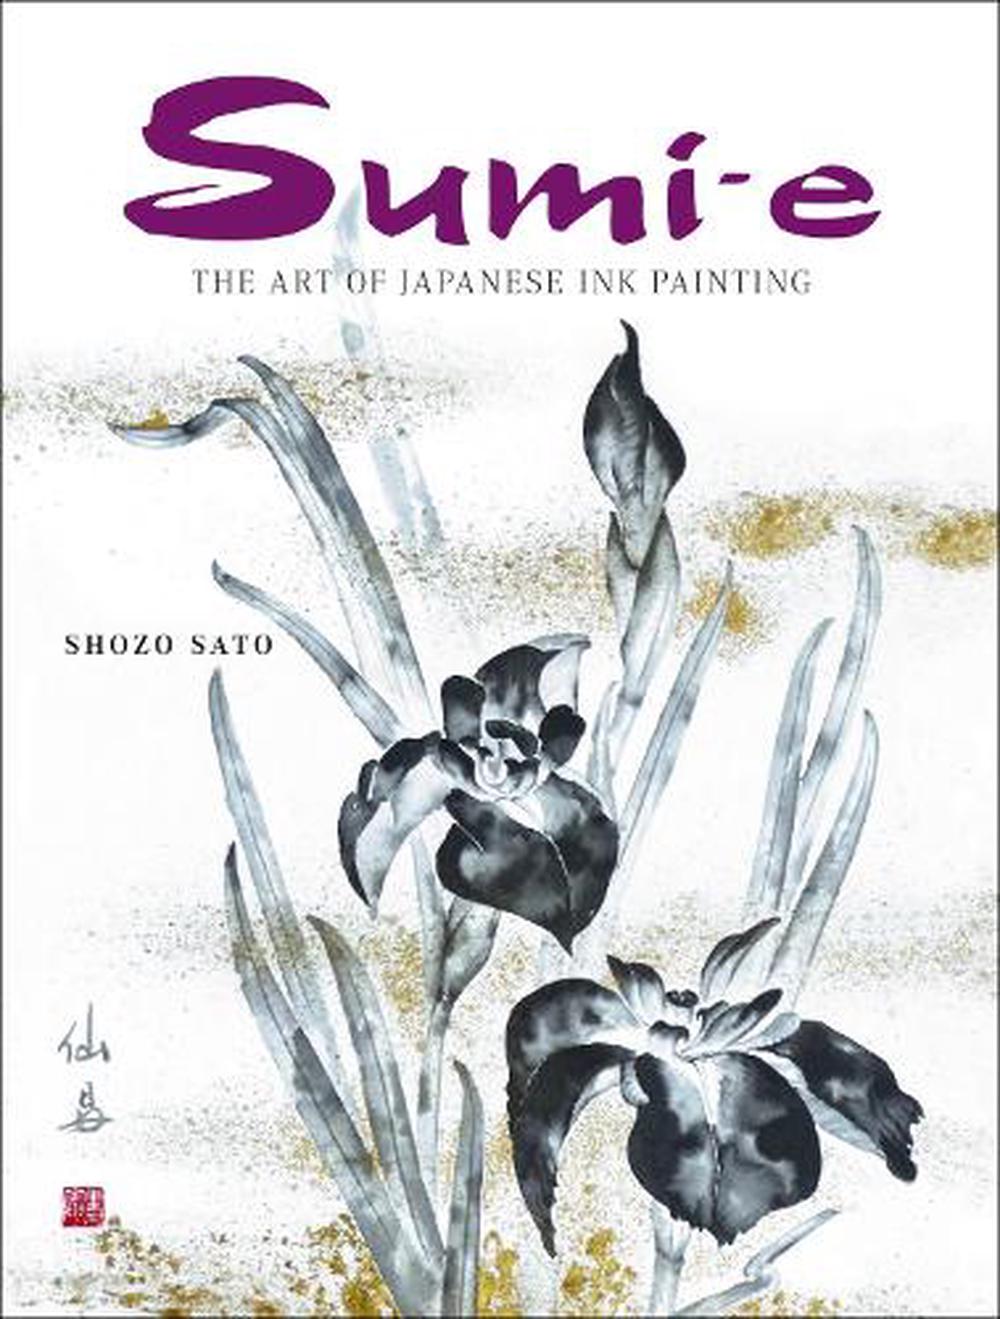 Sumie The Art of Japanese Ink Painting [With CD/DVD] by